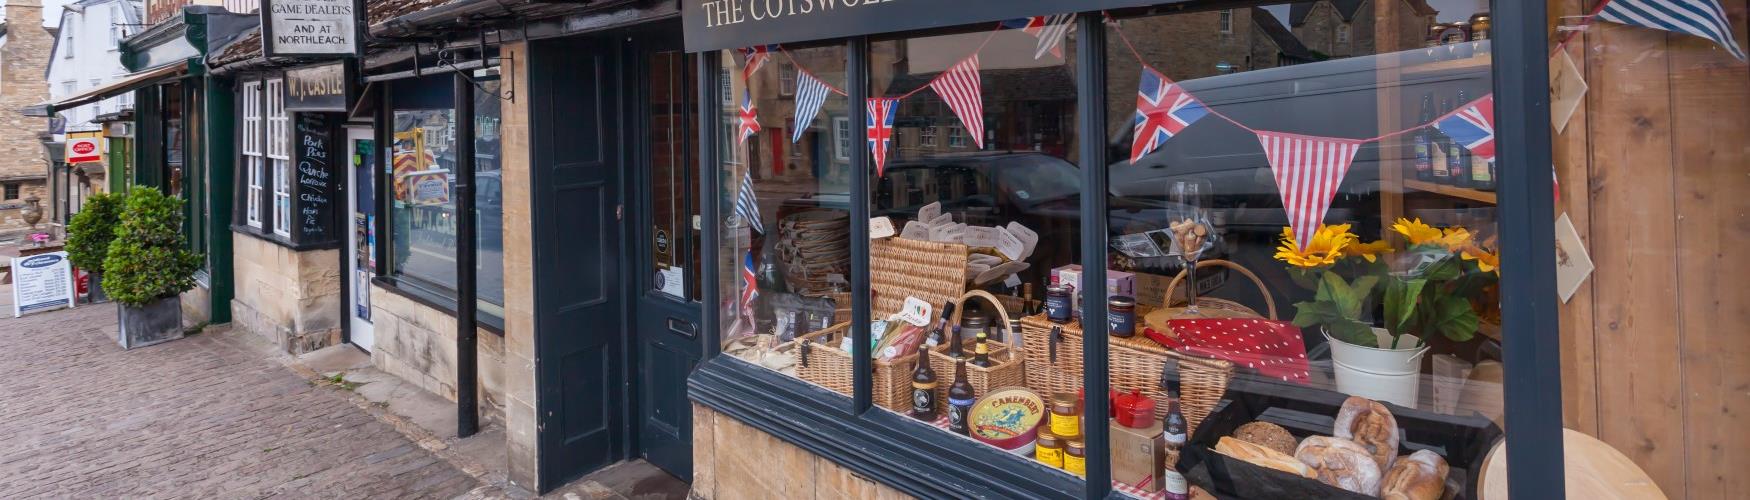 The Cotswold Cheese Company shop in Burford